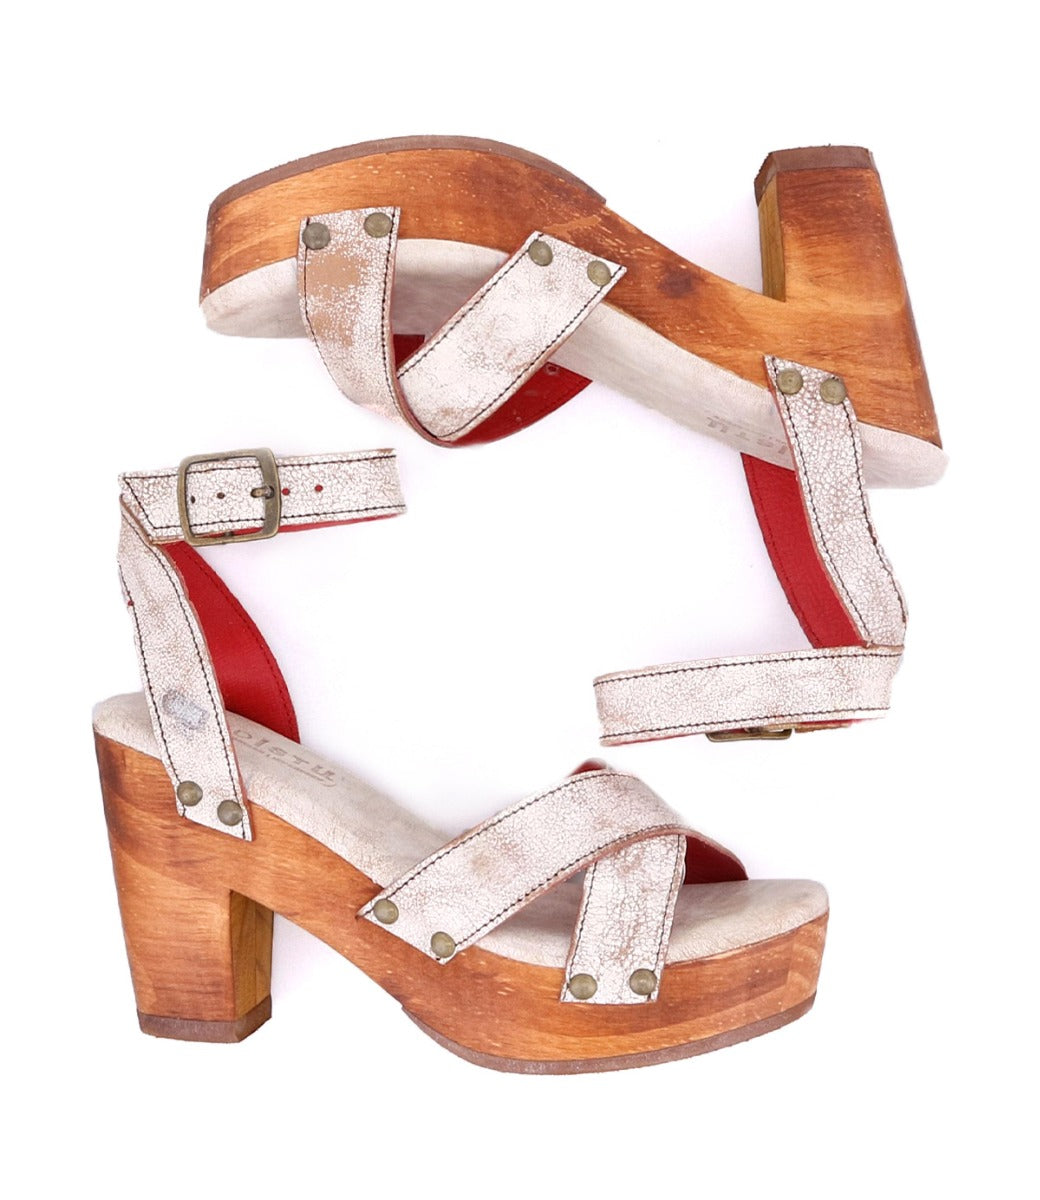 A pair of Kalah sandals by Bed Stu with red and white straps.